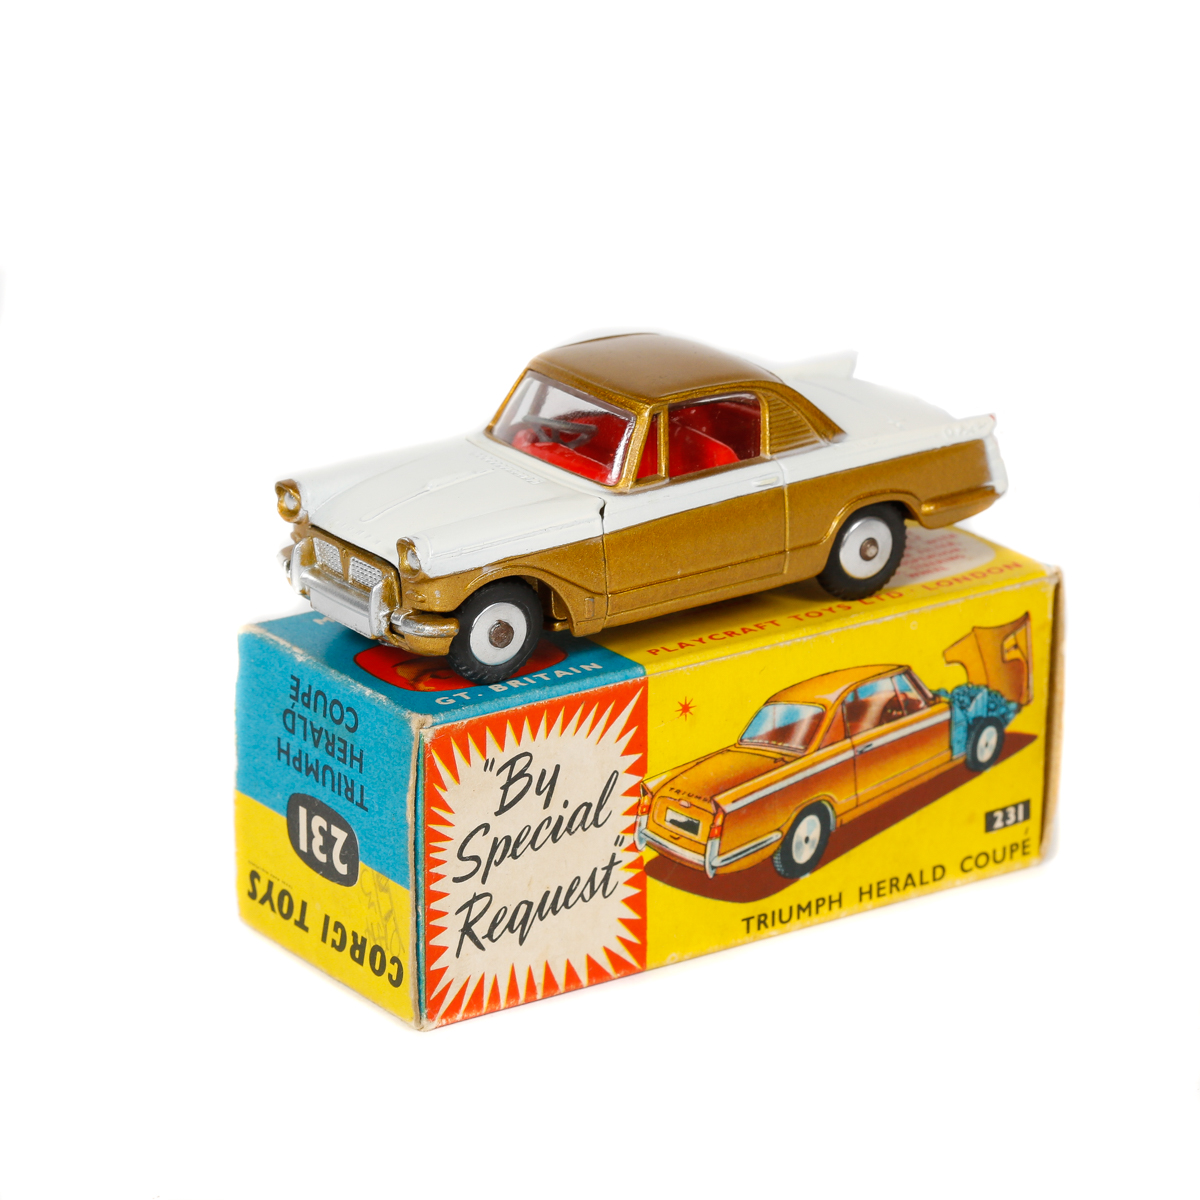 Corgi Toys Triumph Herald Coupe (231). In white and metallic gold with red interior. Harder to